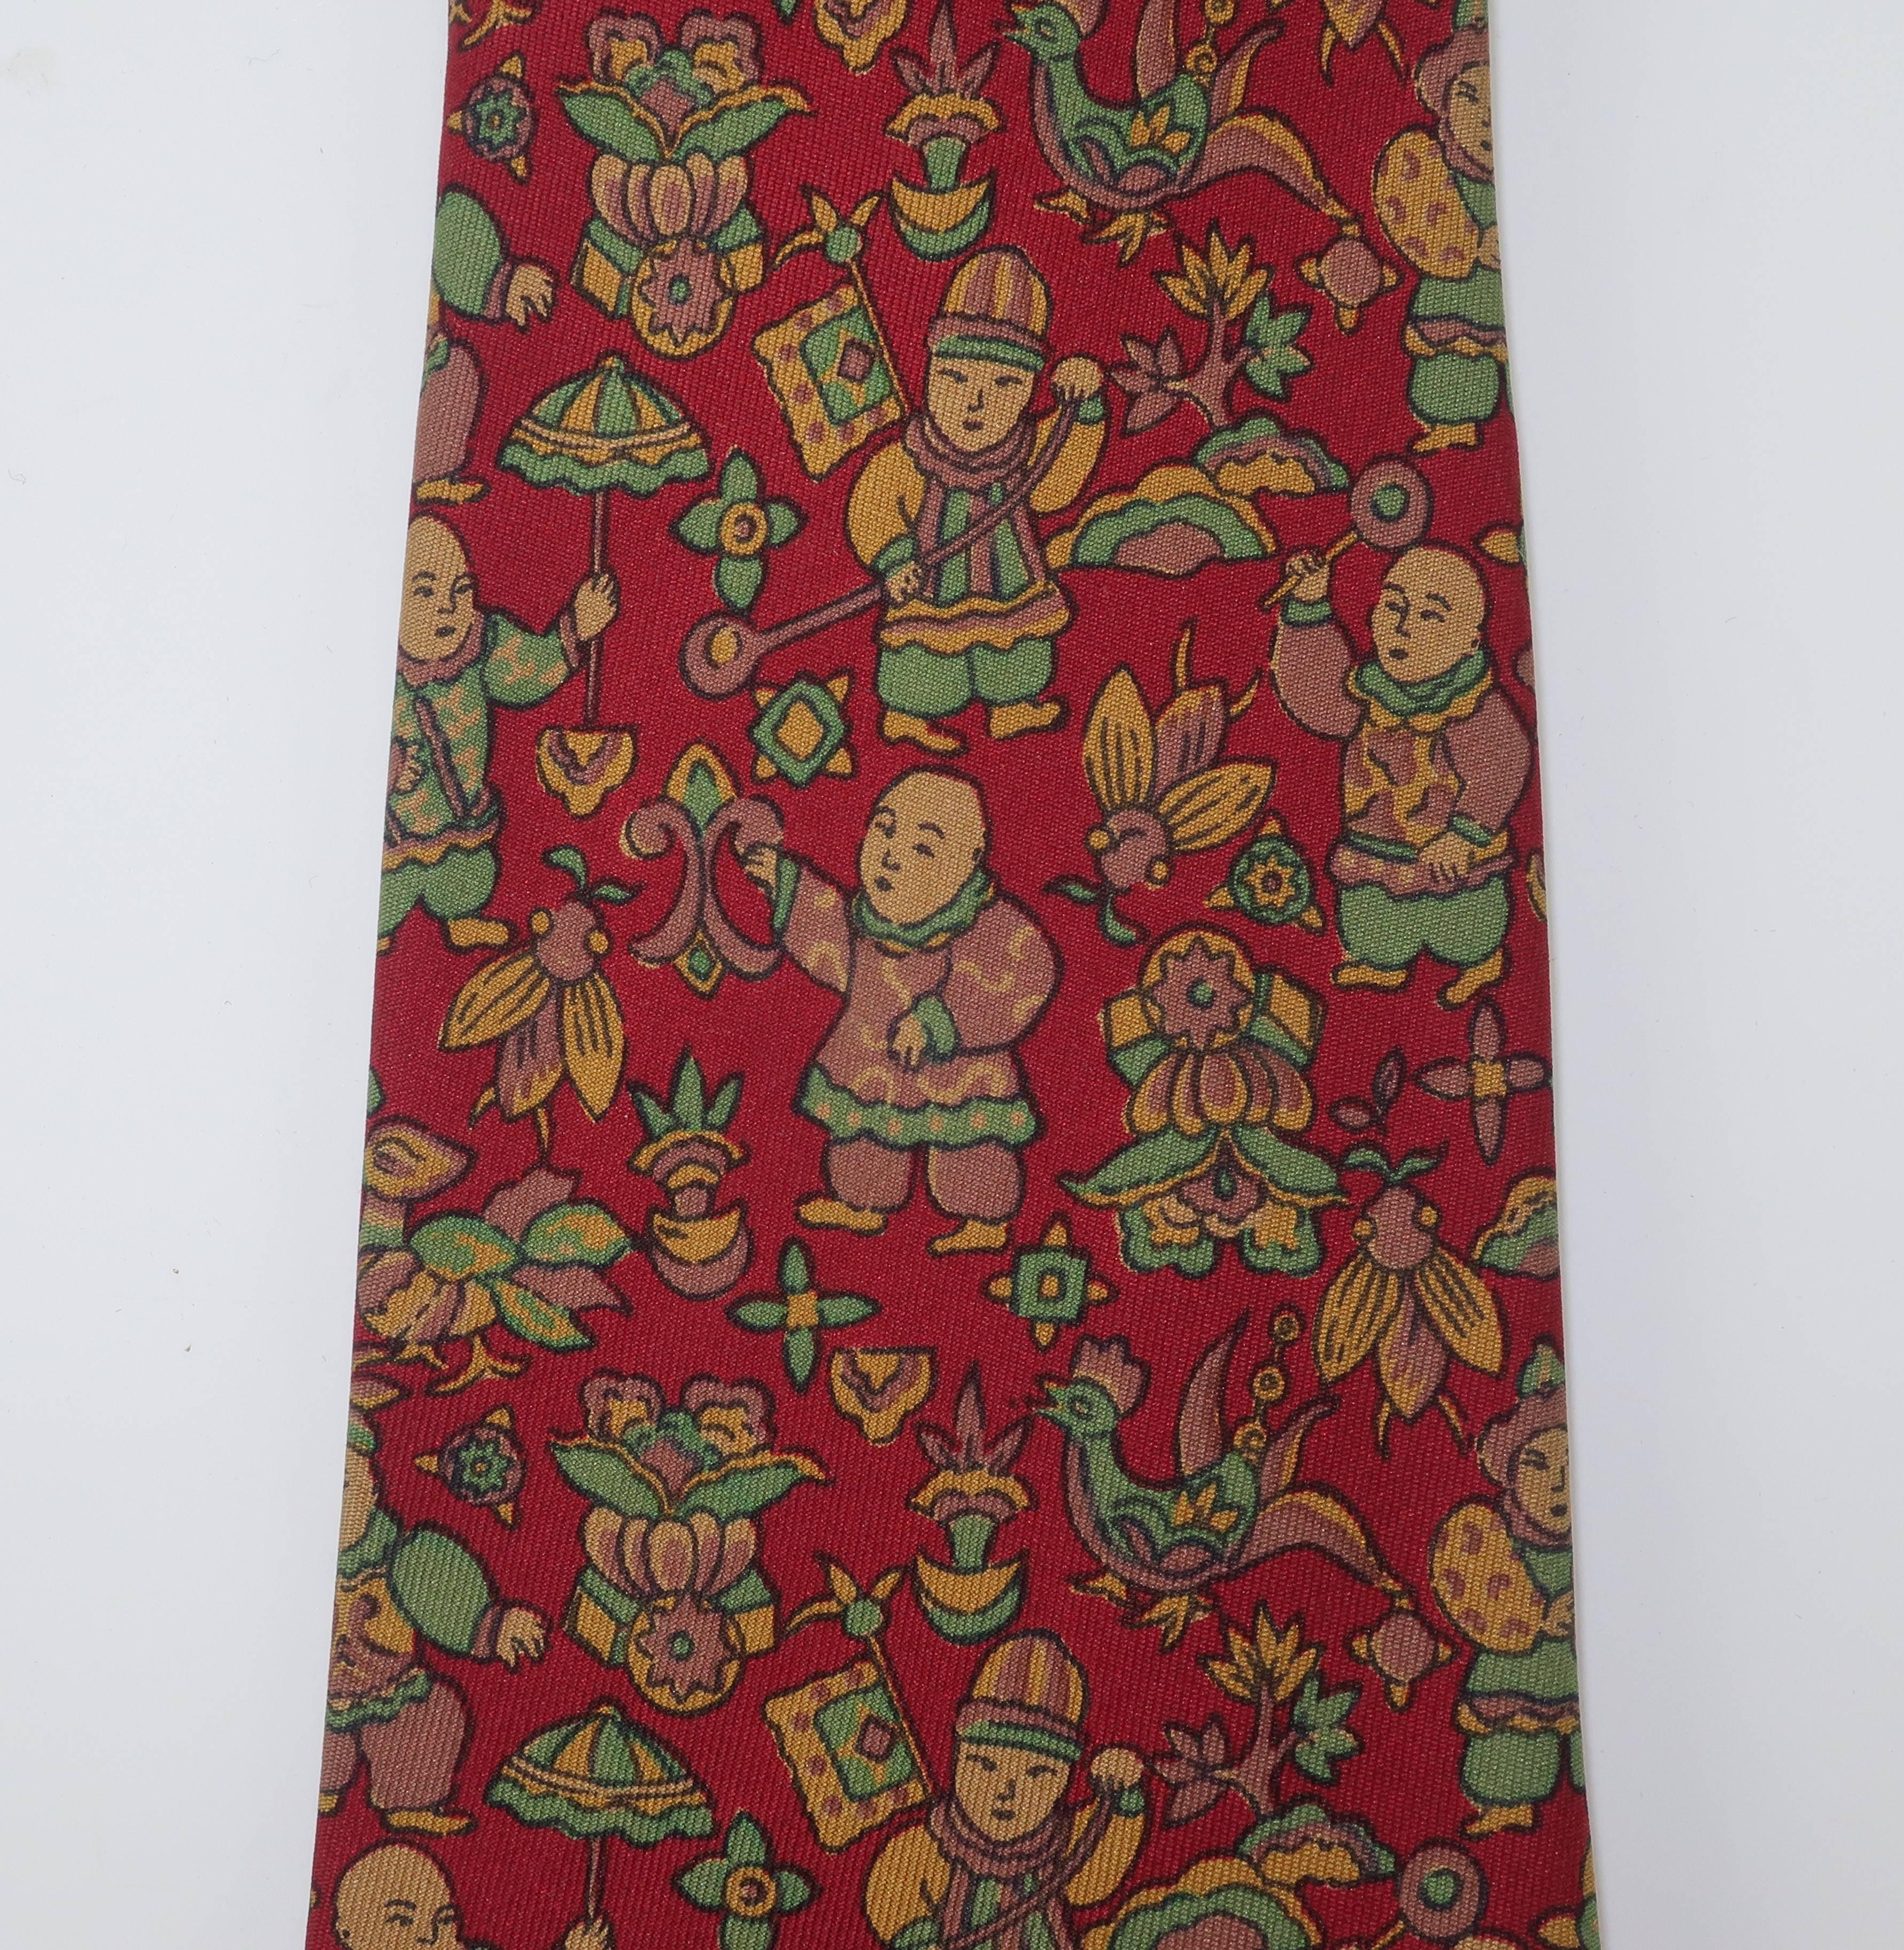 Ferragamo creates a menswear silk necktie with a whimsical motif depicting Asian figures with umbrellas, flags and instruments all in traditional costumes.  The rich background color is a deep burgundy red with shades of olive green, beige and light